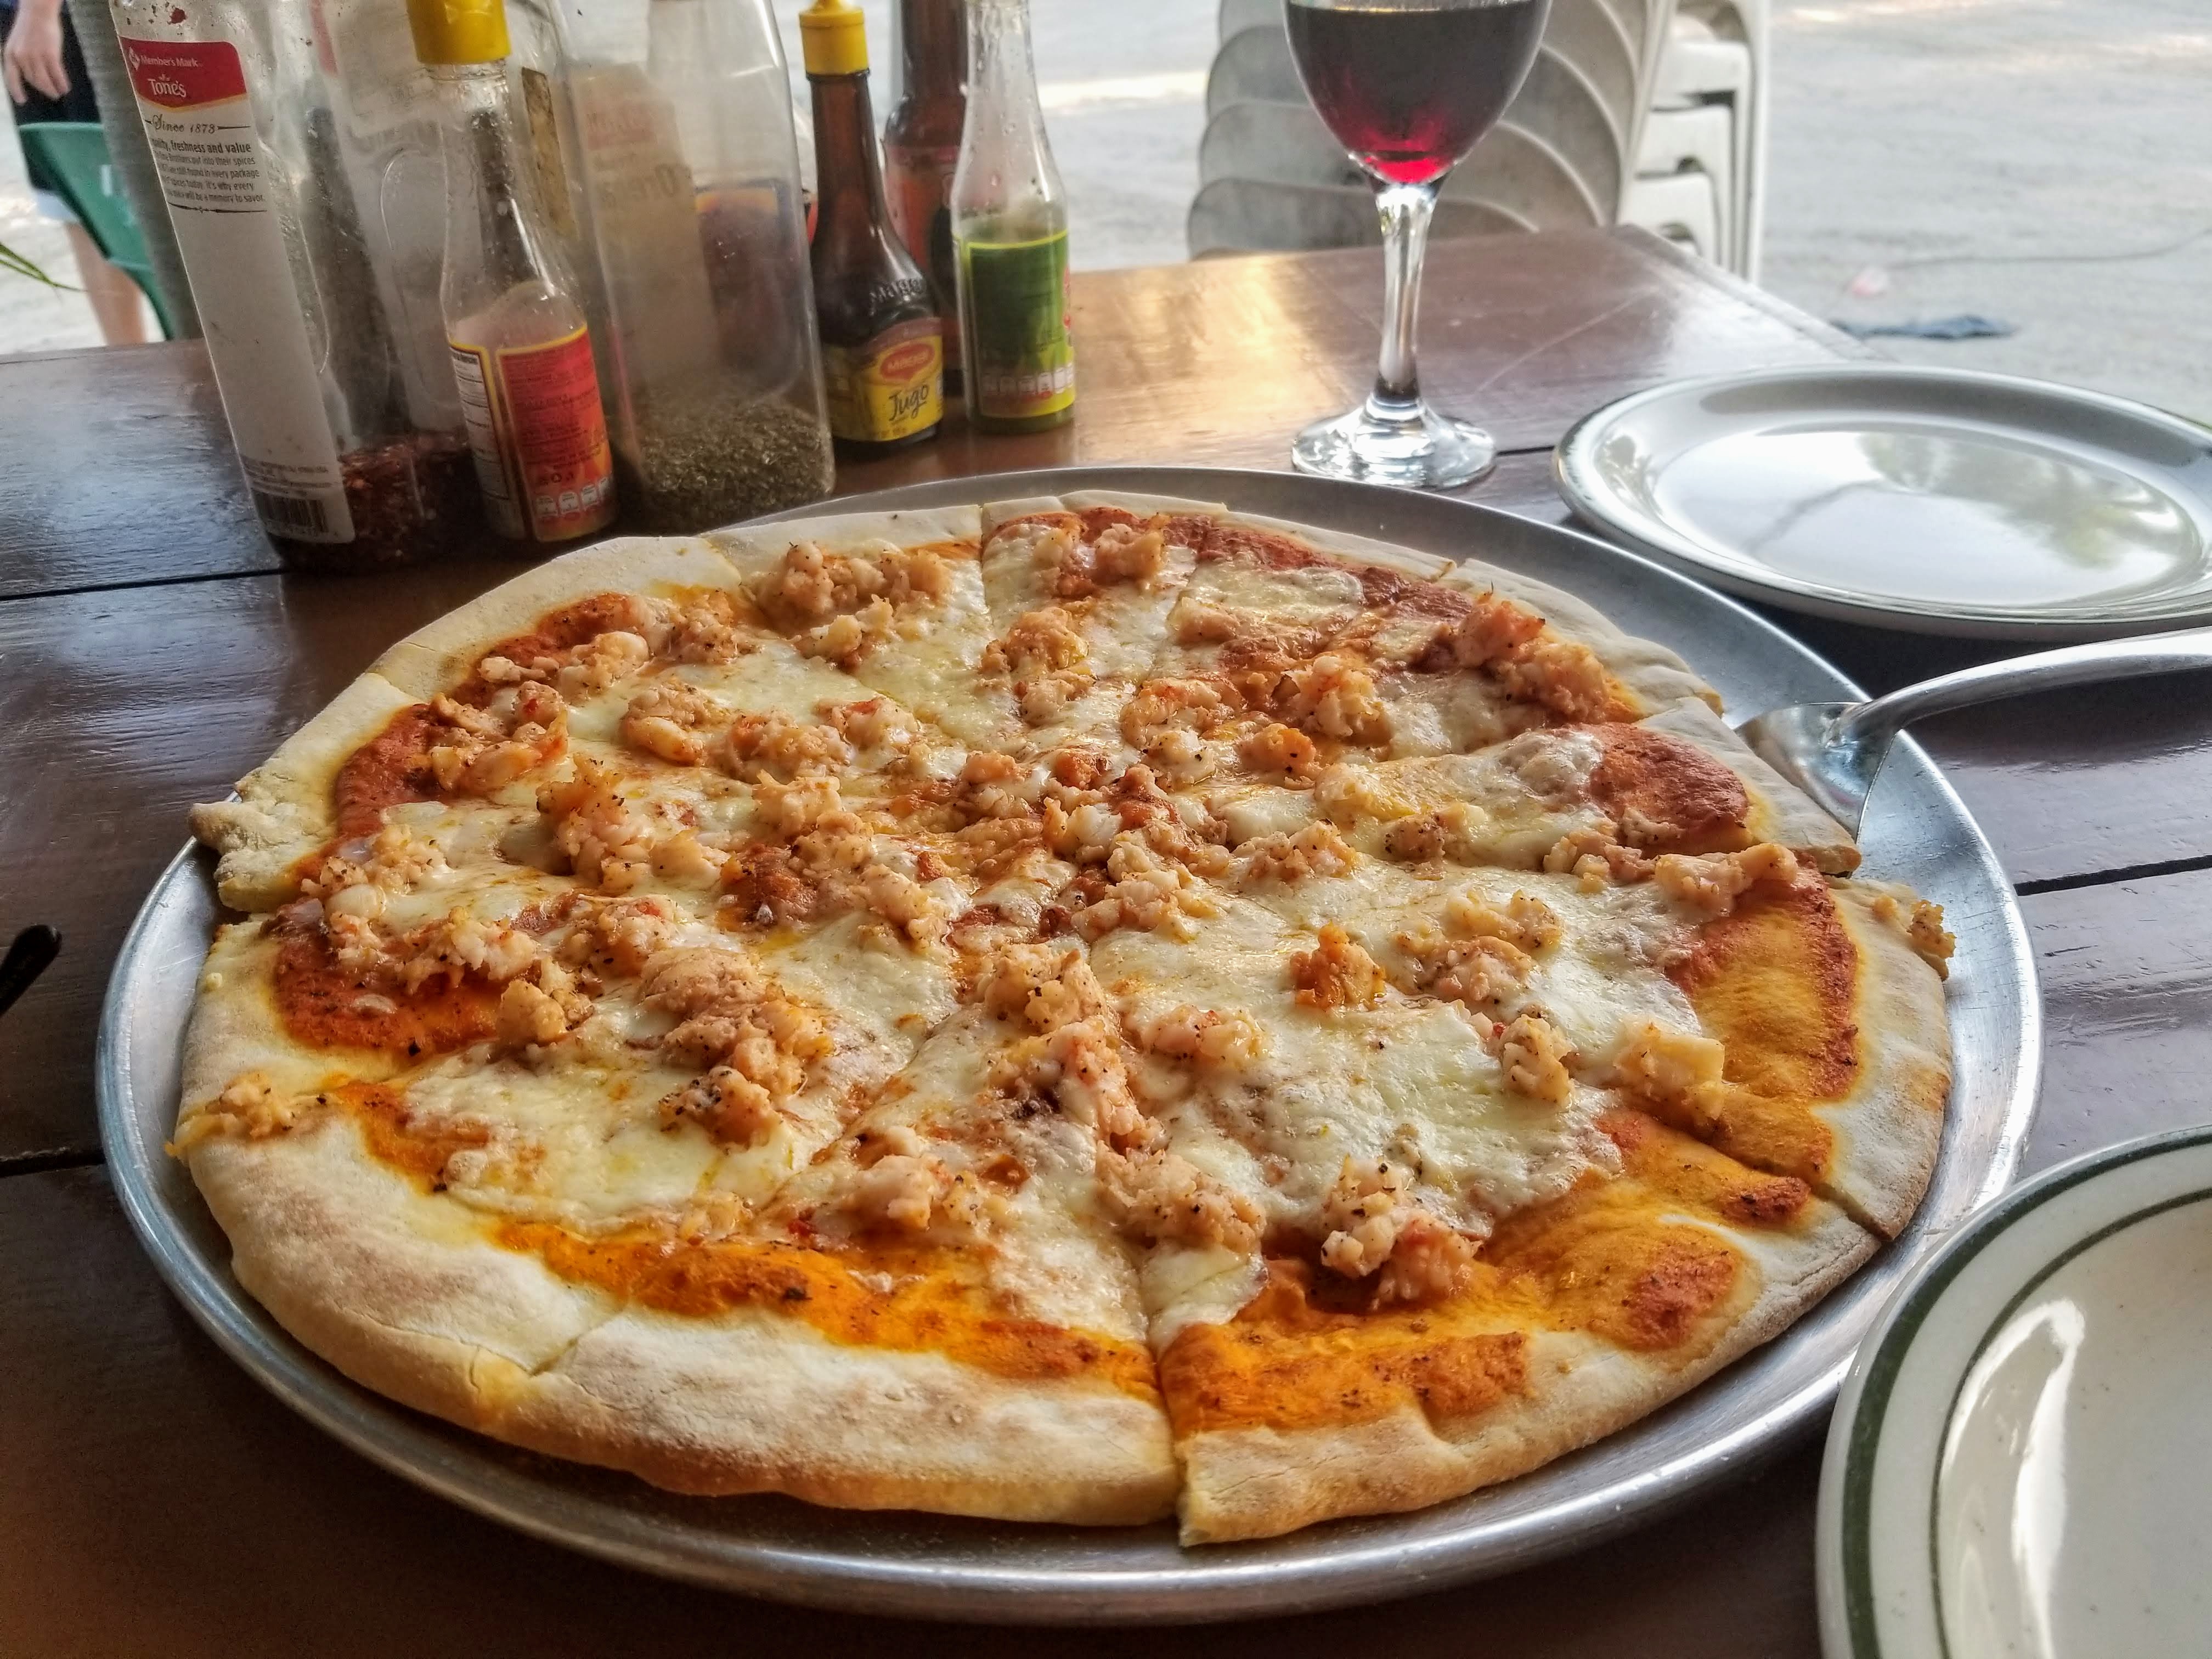 a large lobster pizza is in the foreground. in the background is a glass of red wine and an assortment of spices and hot sauces.